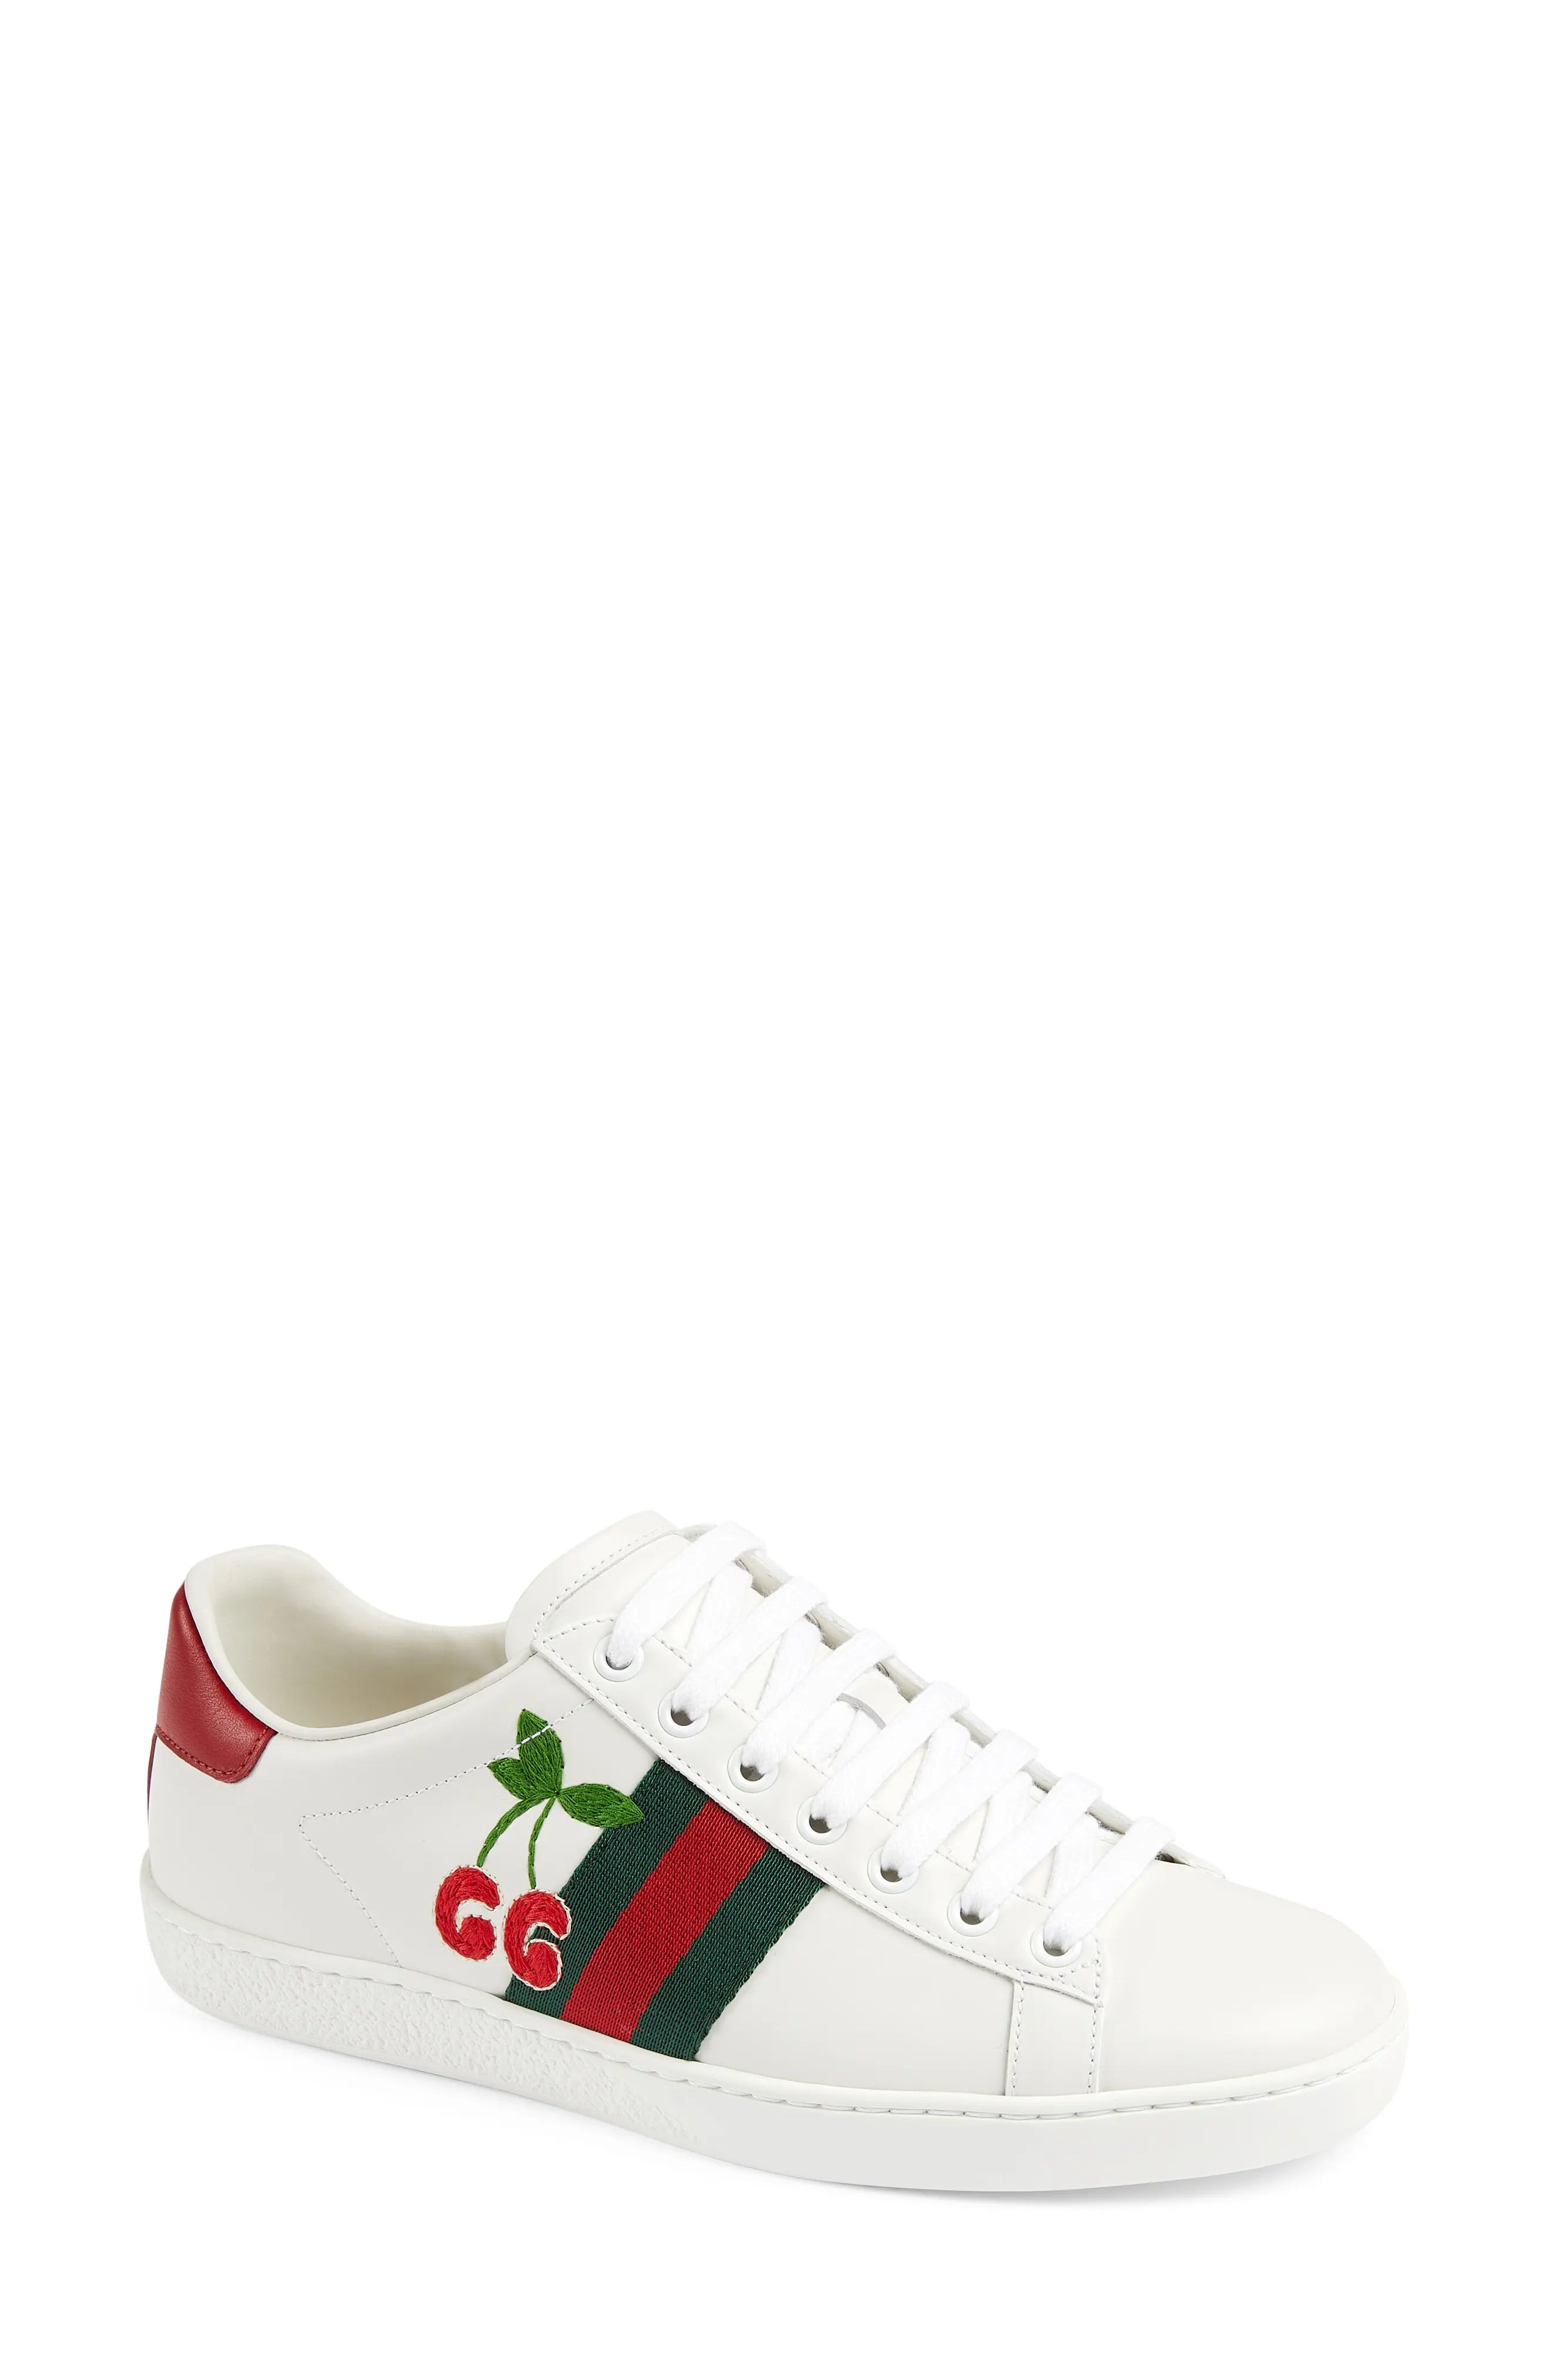 Gucci New Ace GG Cherry Sneaker in White/Green/Red at Nordstrom, Size 9.5Us | Nordstrom